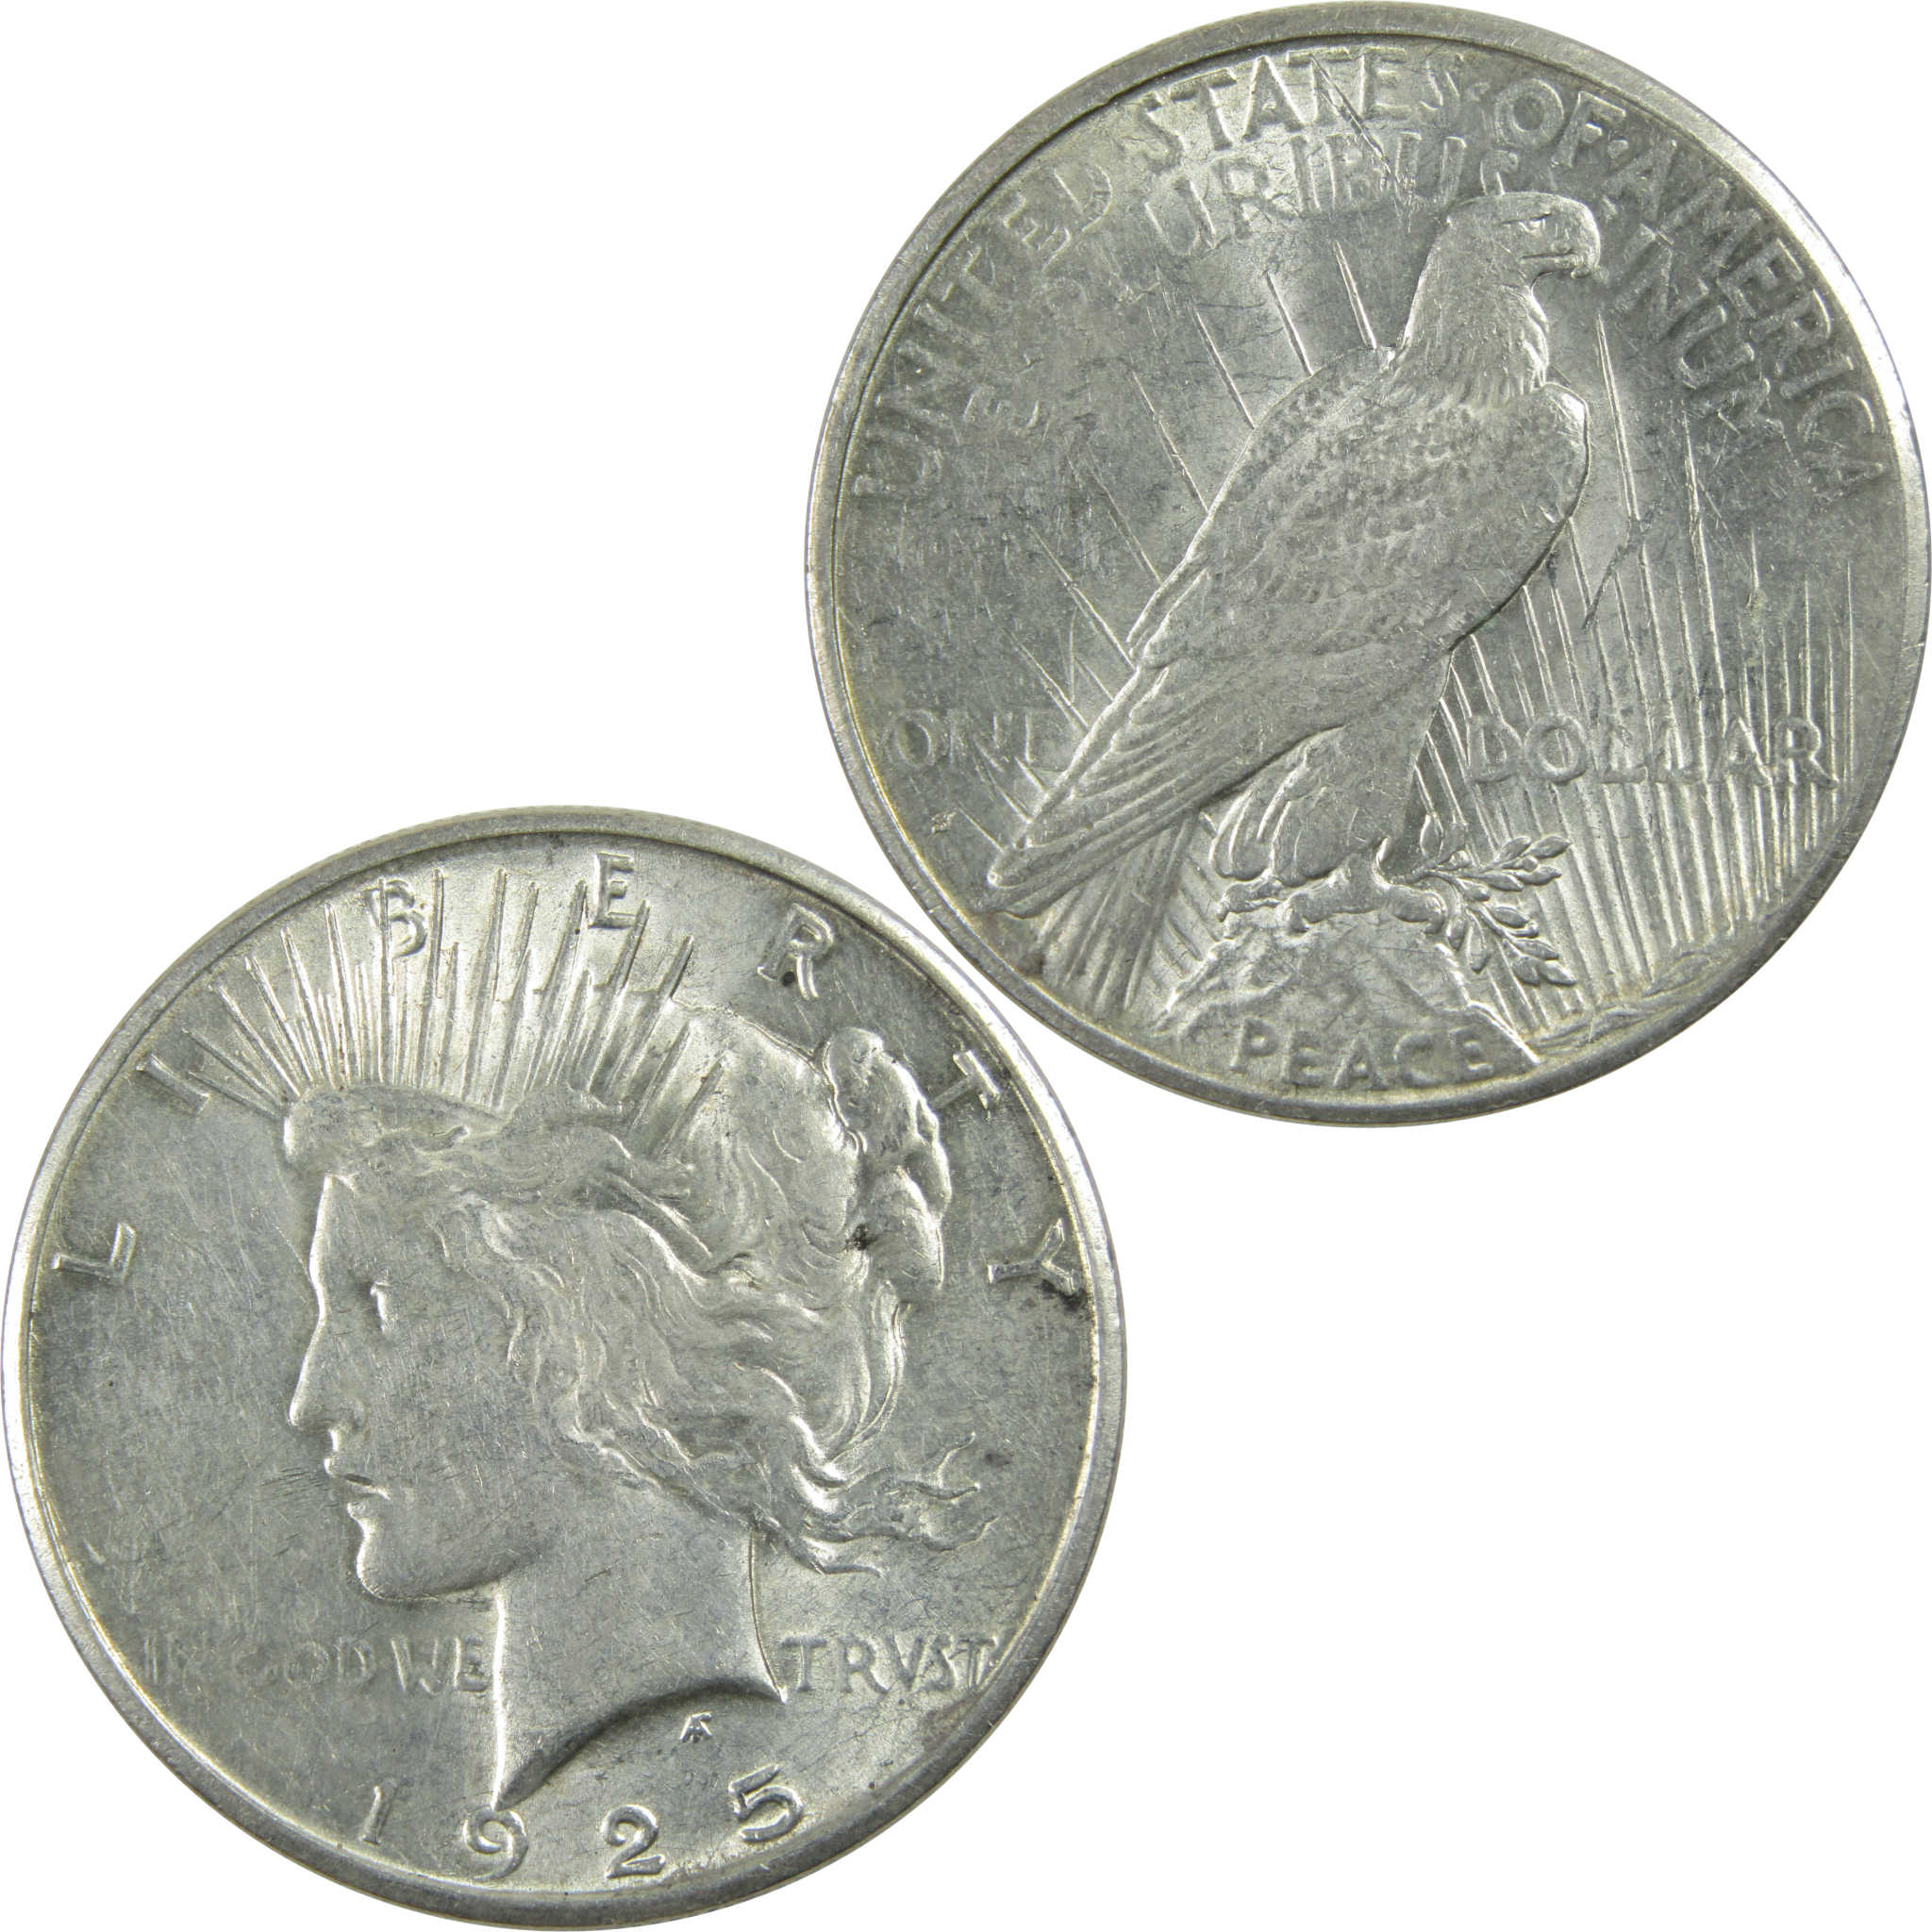 1925 S Peace Dollar AU About Uncirculated Silver $1 Coin SKU:I13381